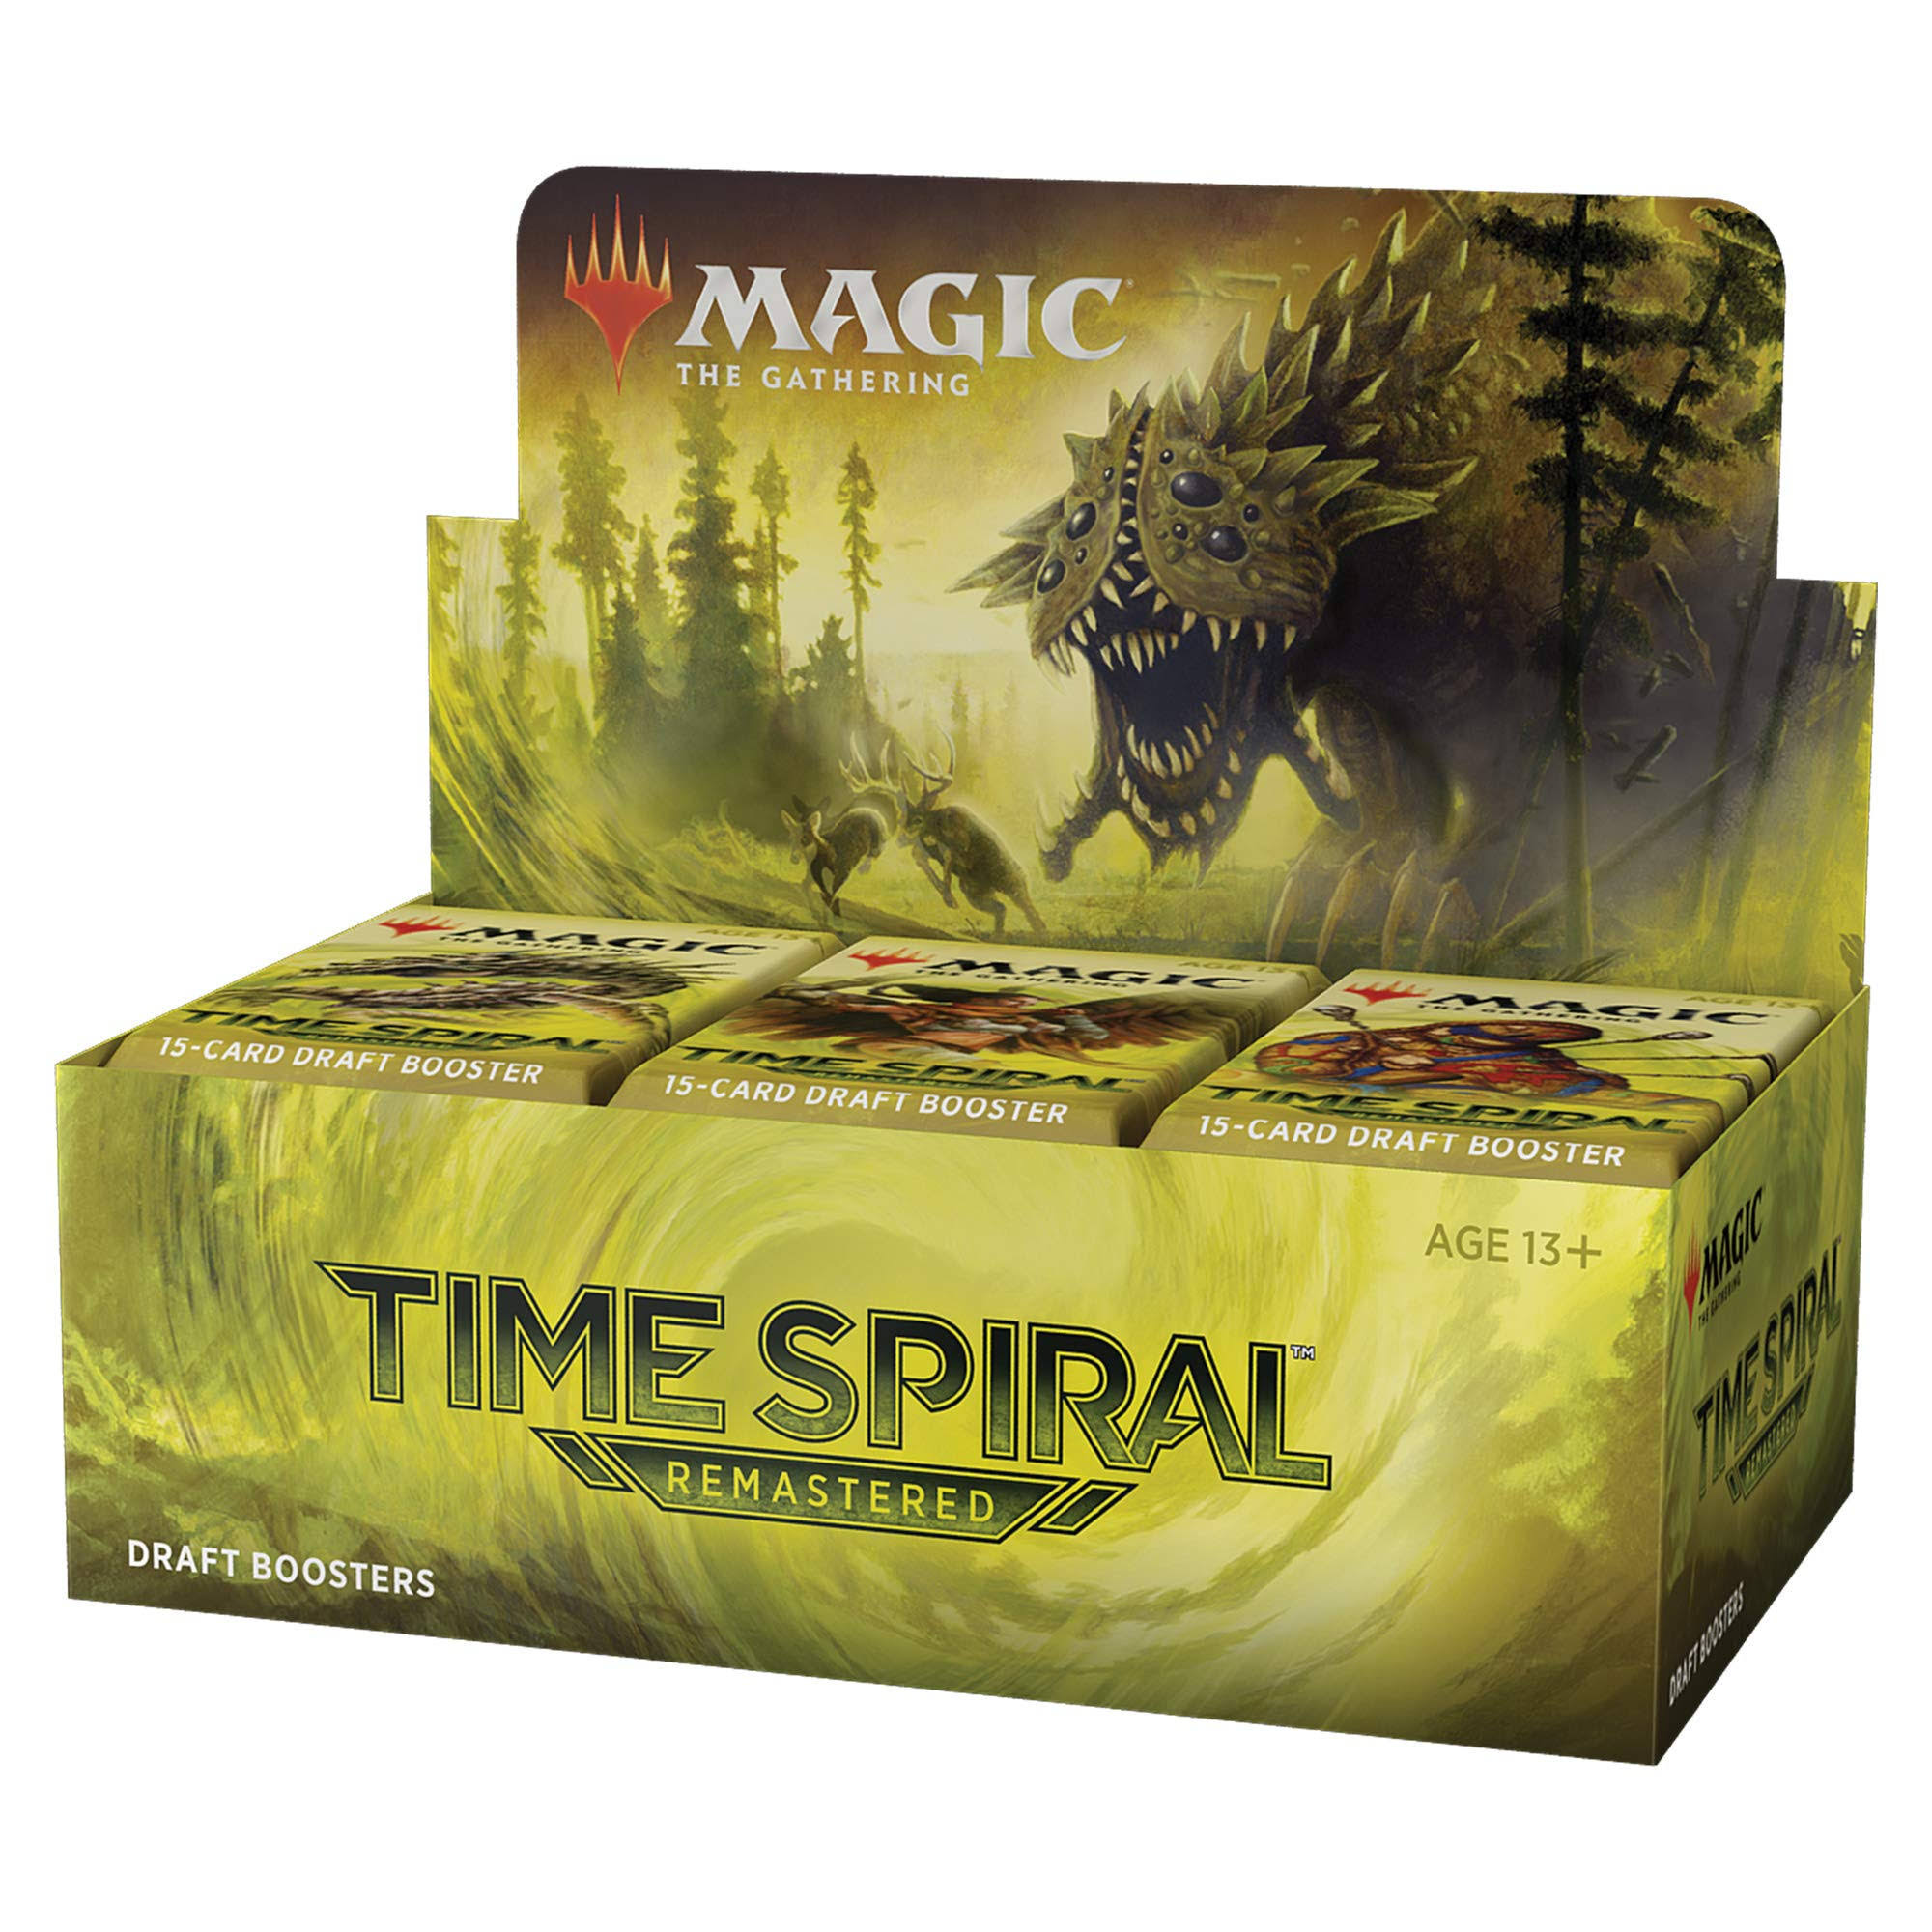 Magic The Gathering: Time Spiral Remastered Draft Booster Box